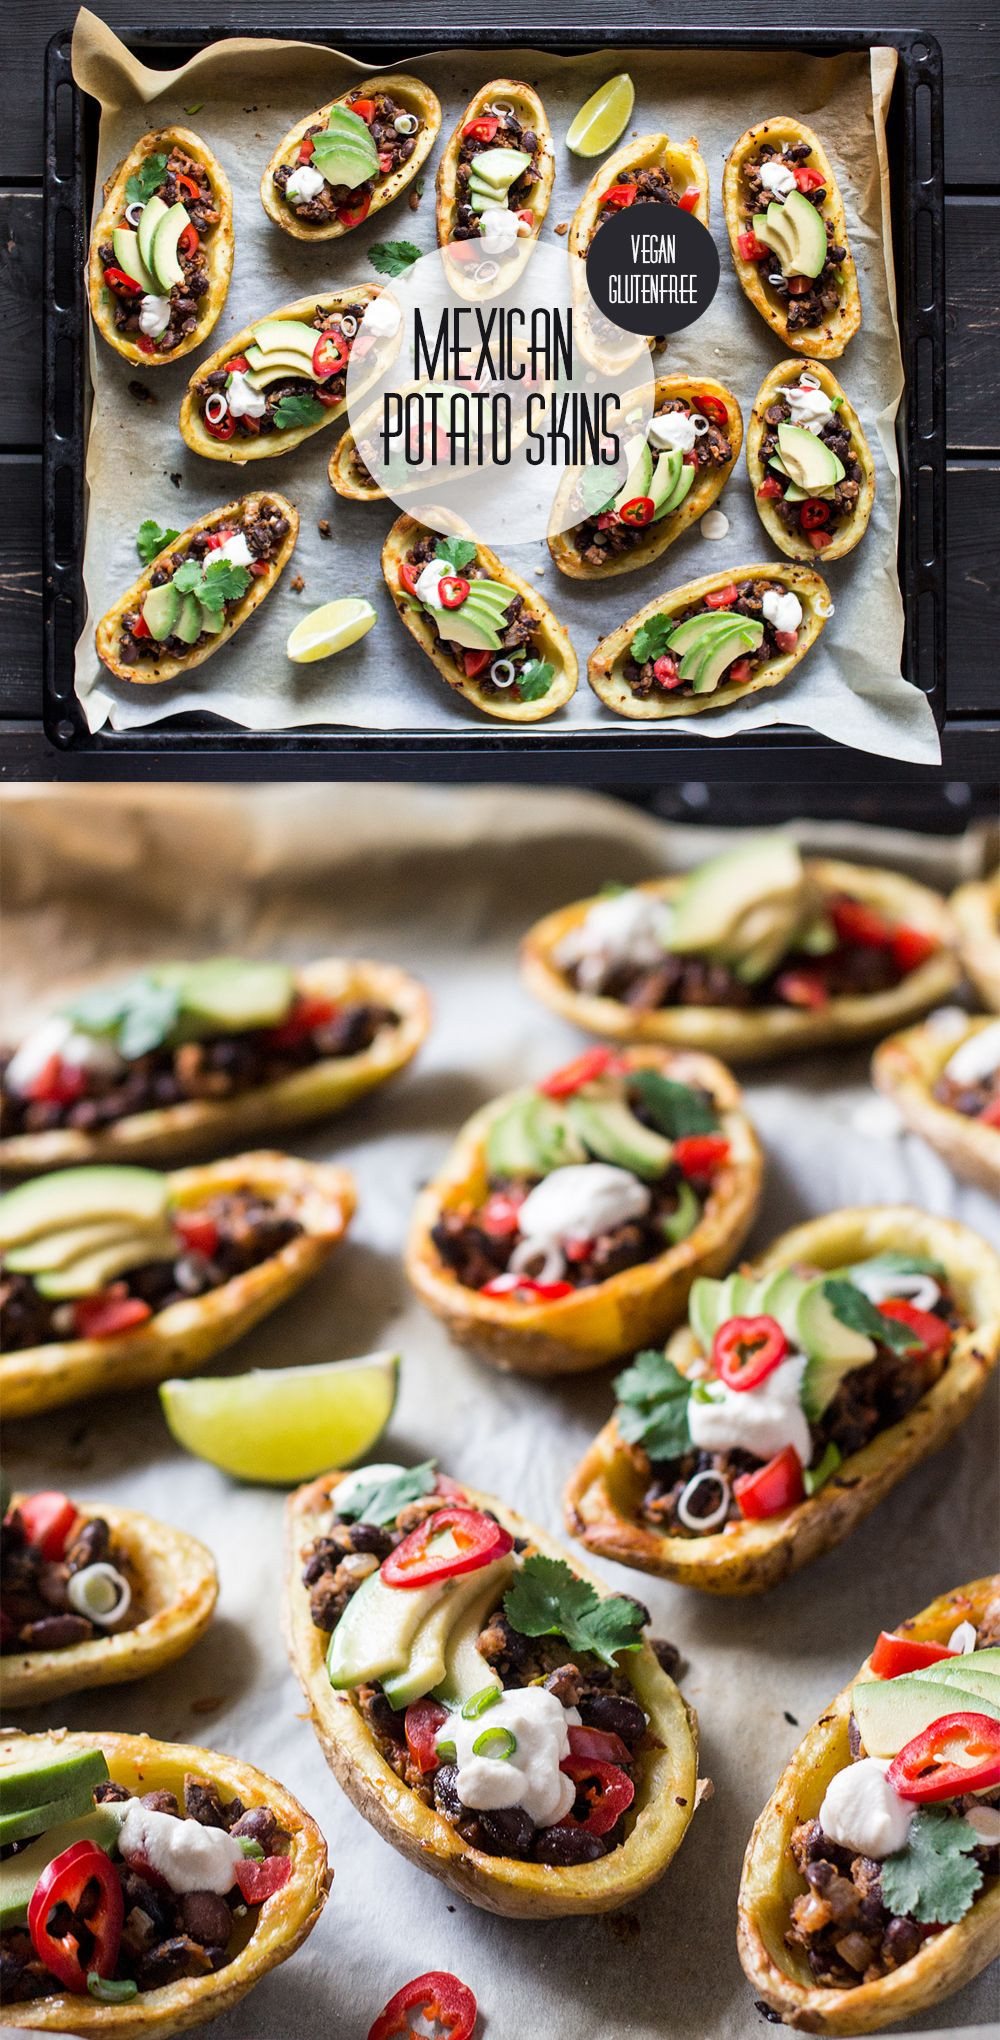 Mexican Appetizers Vegetarian
 Mexican potato skins Recipe